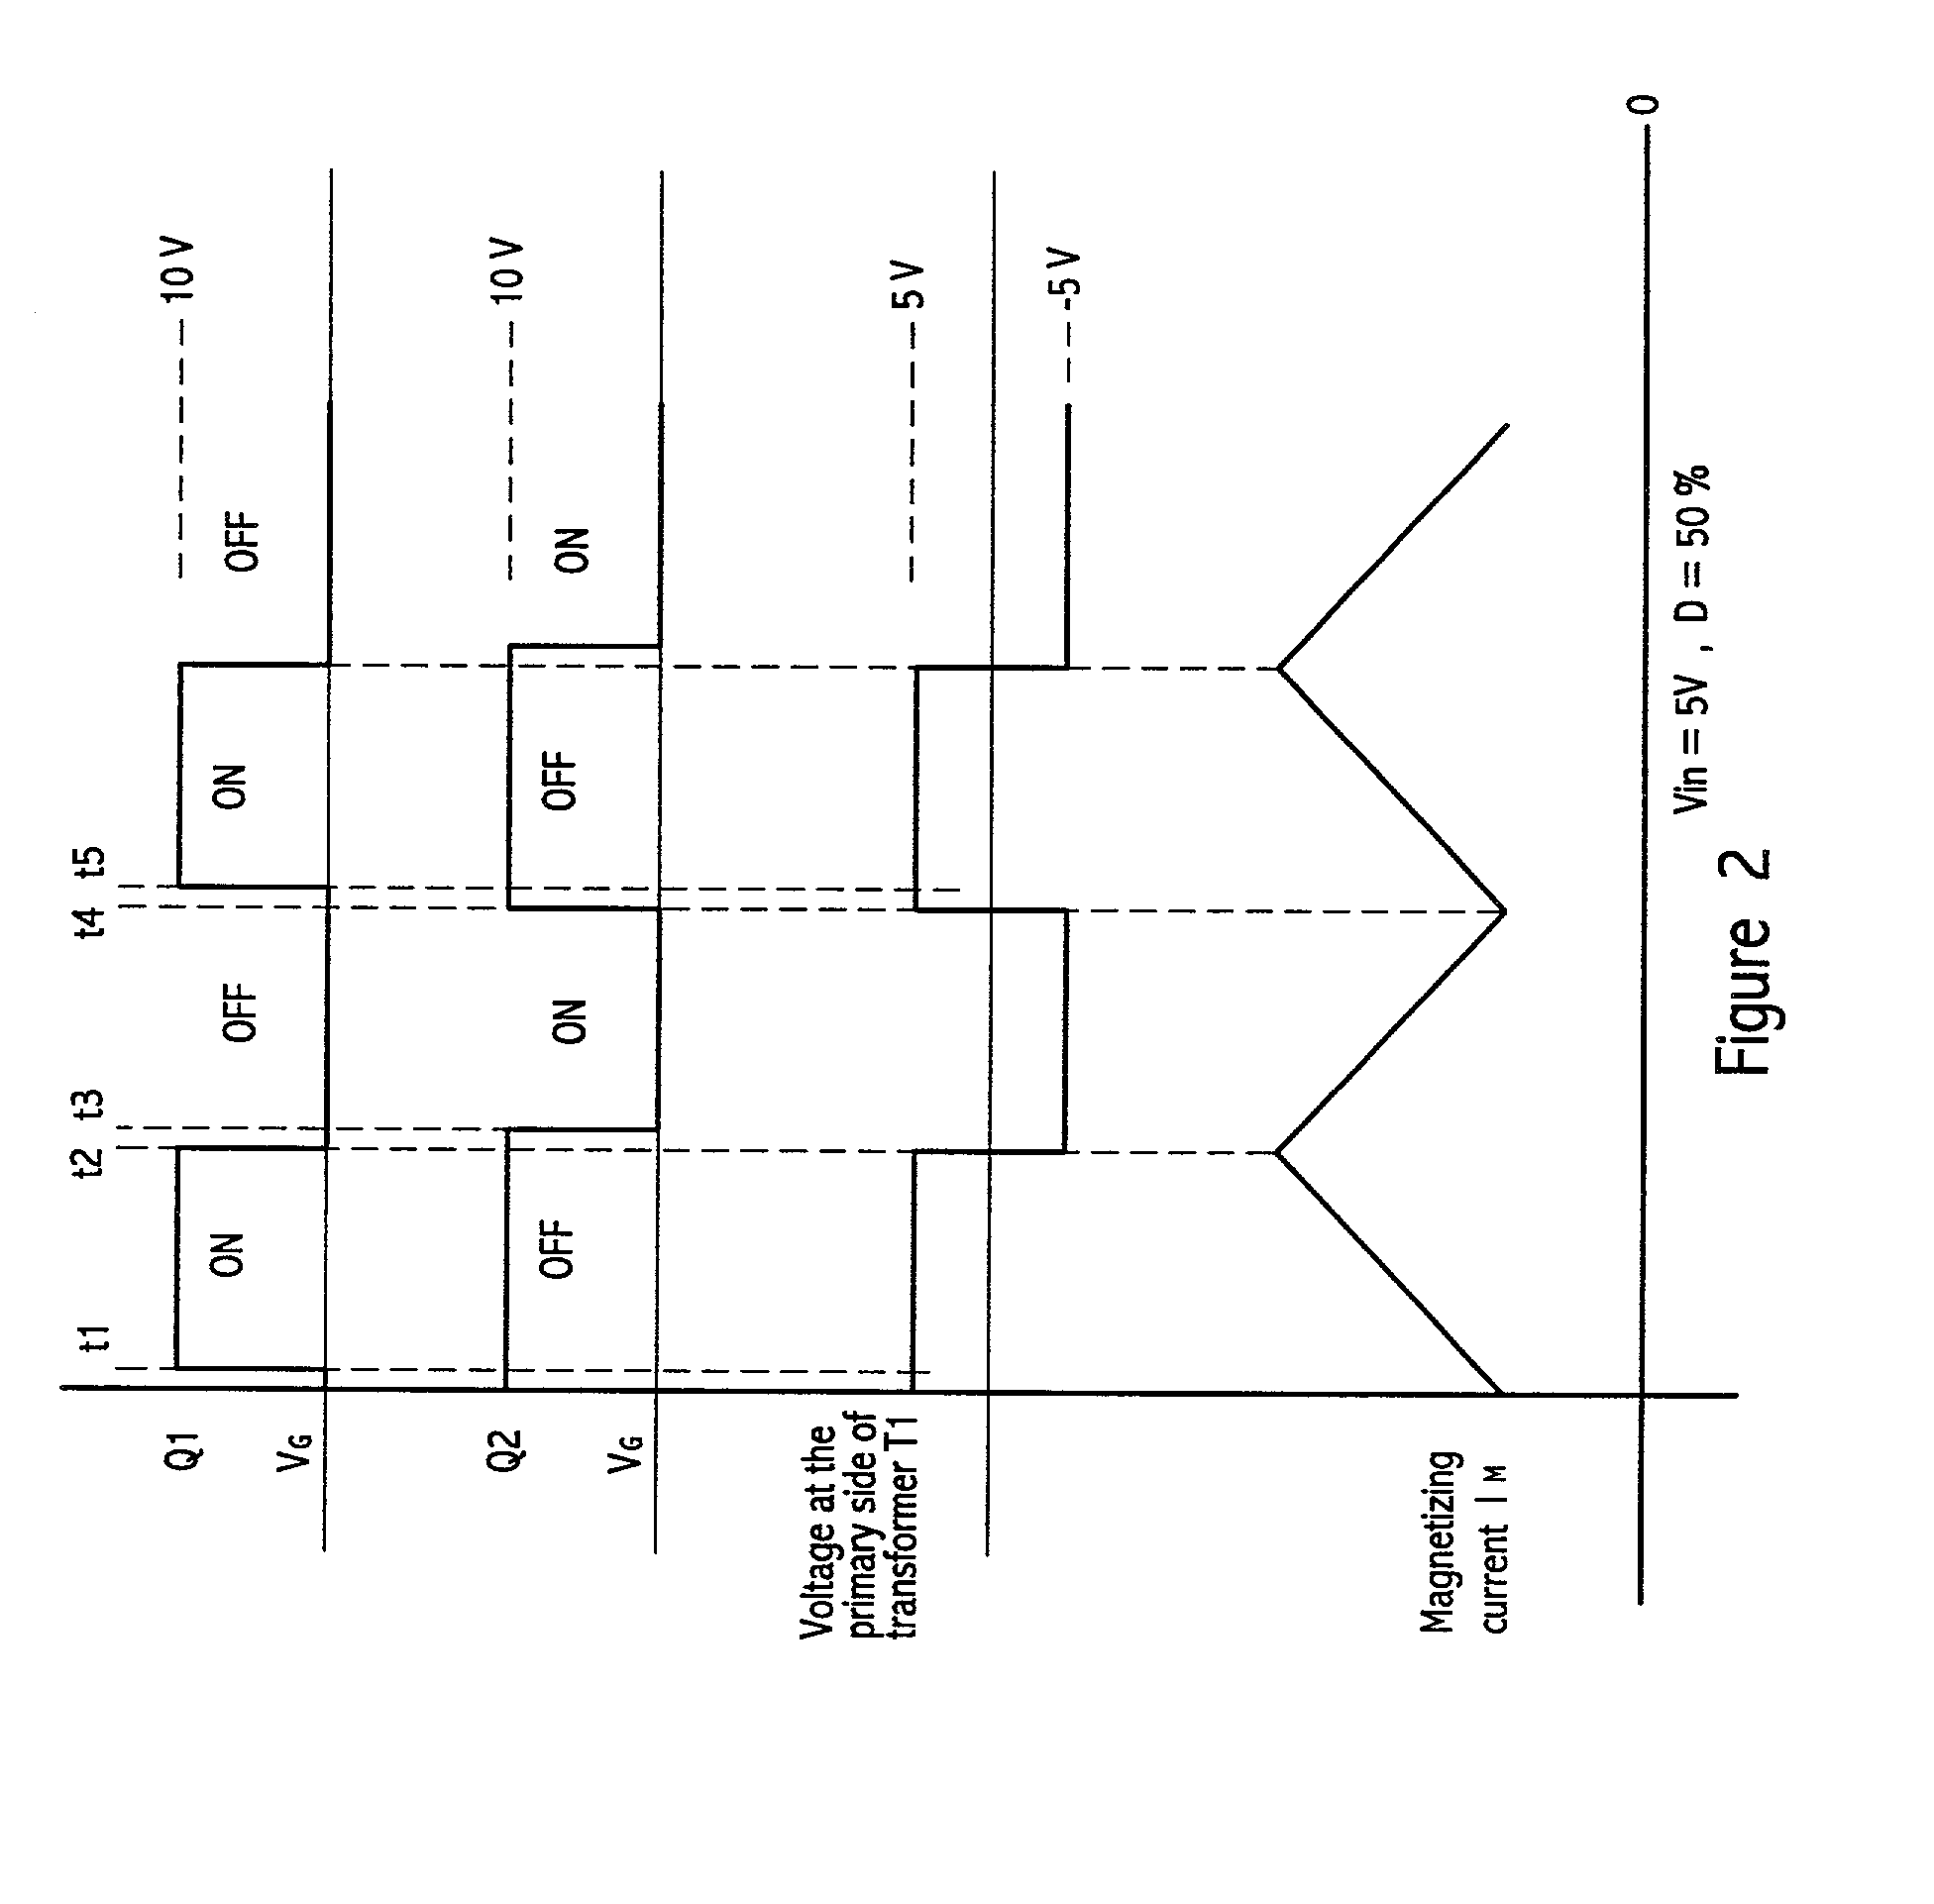 Inverter and lamp ignition system using the same